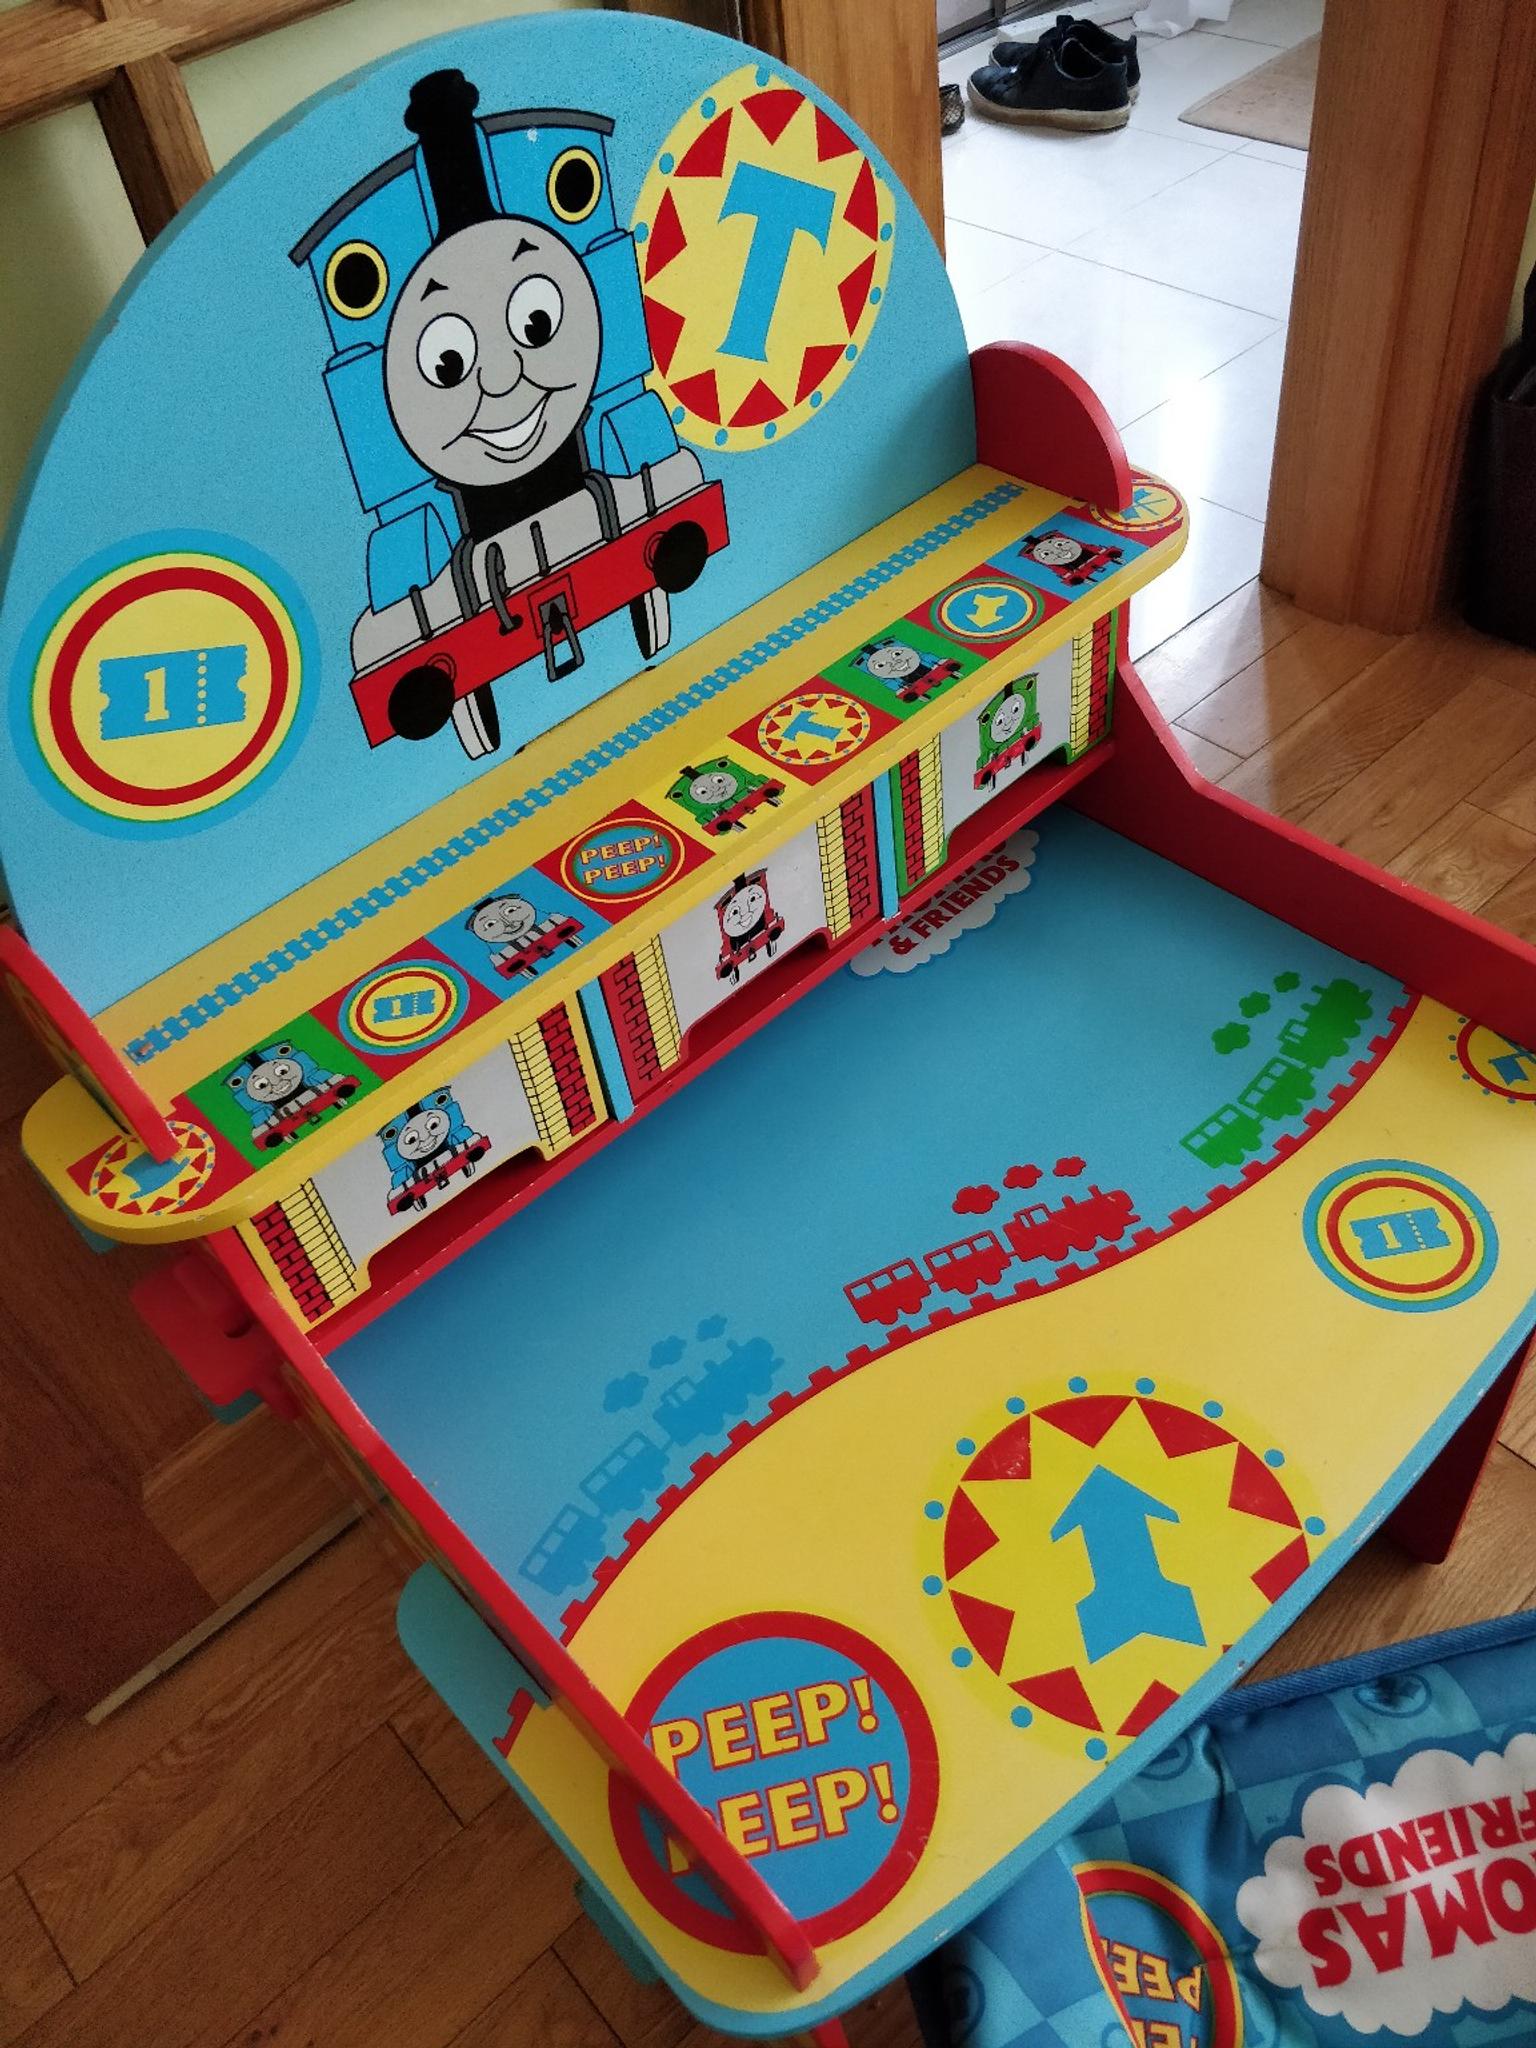 Thomas The Tank Engine Desk And Chair In S12 Sheffield For 15 00